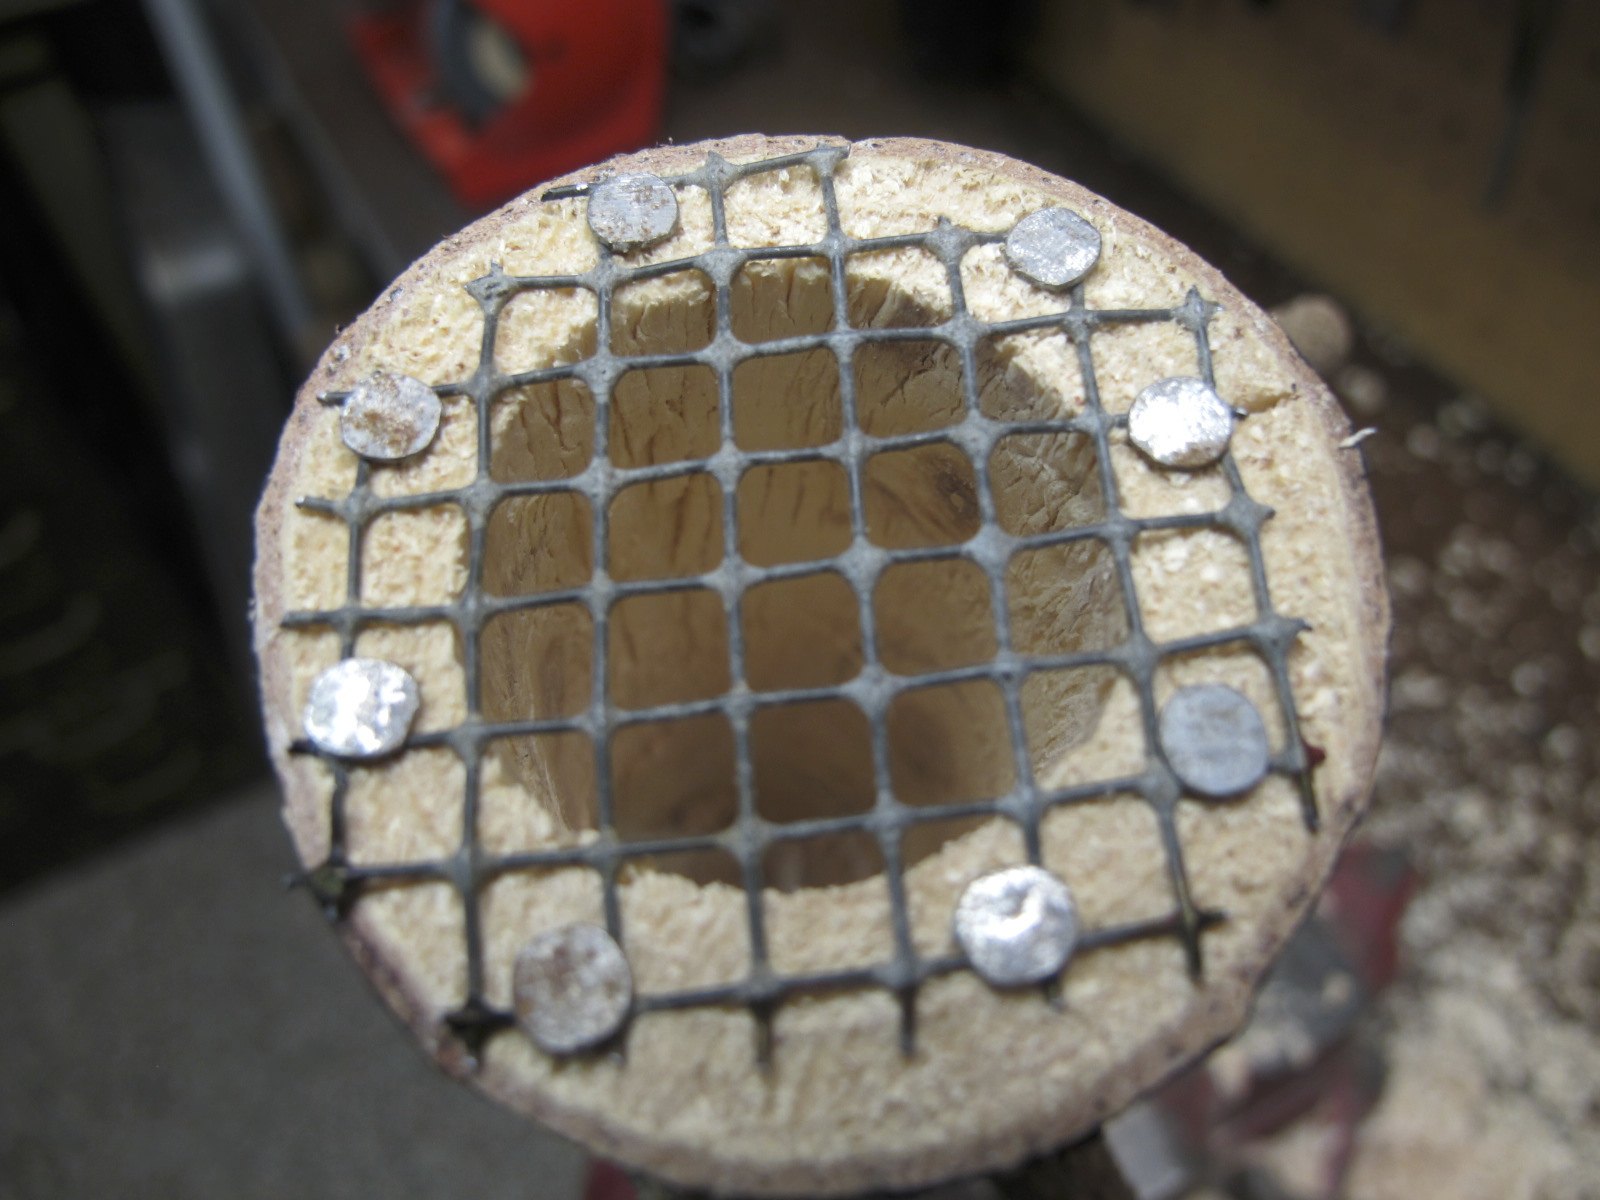  Attach wire mesh bottom using small broad headed nails or tacts to secure into place. 